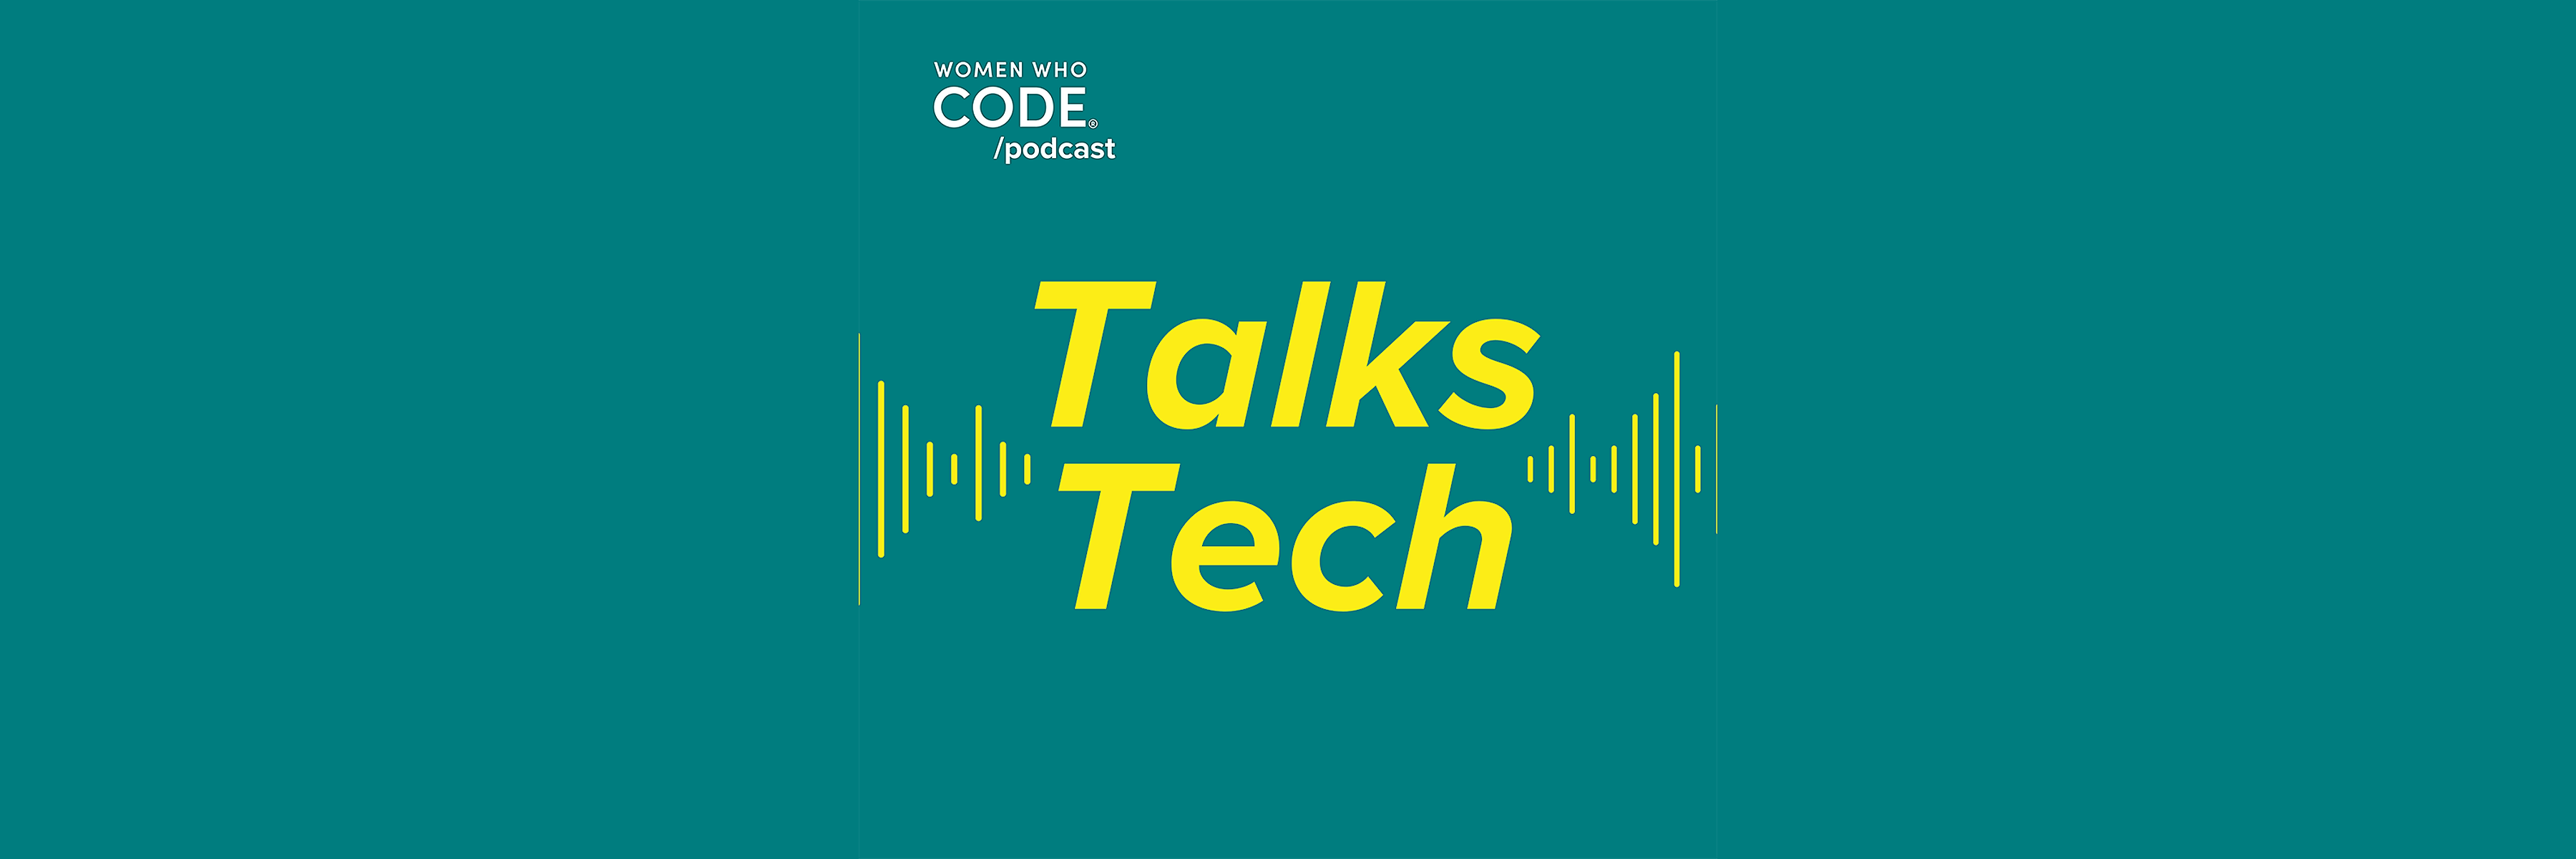 Talks Tech #41: Build a Data Science Project From Scratch